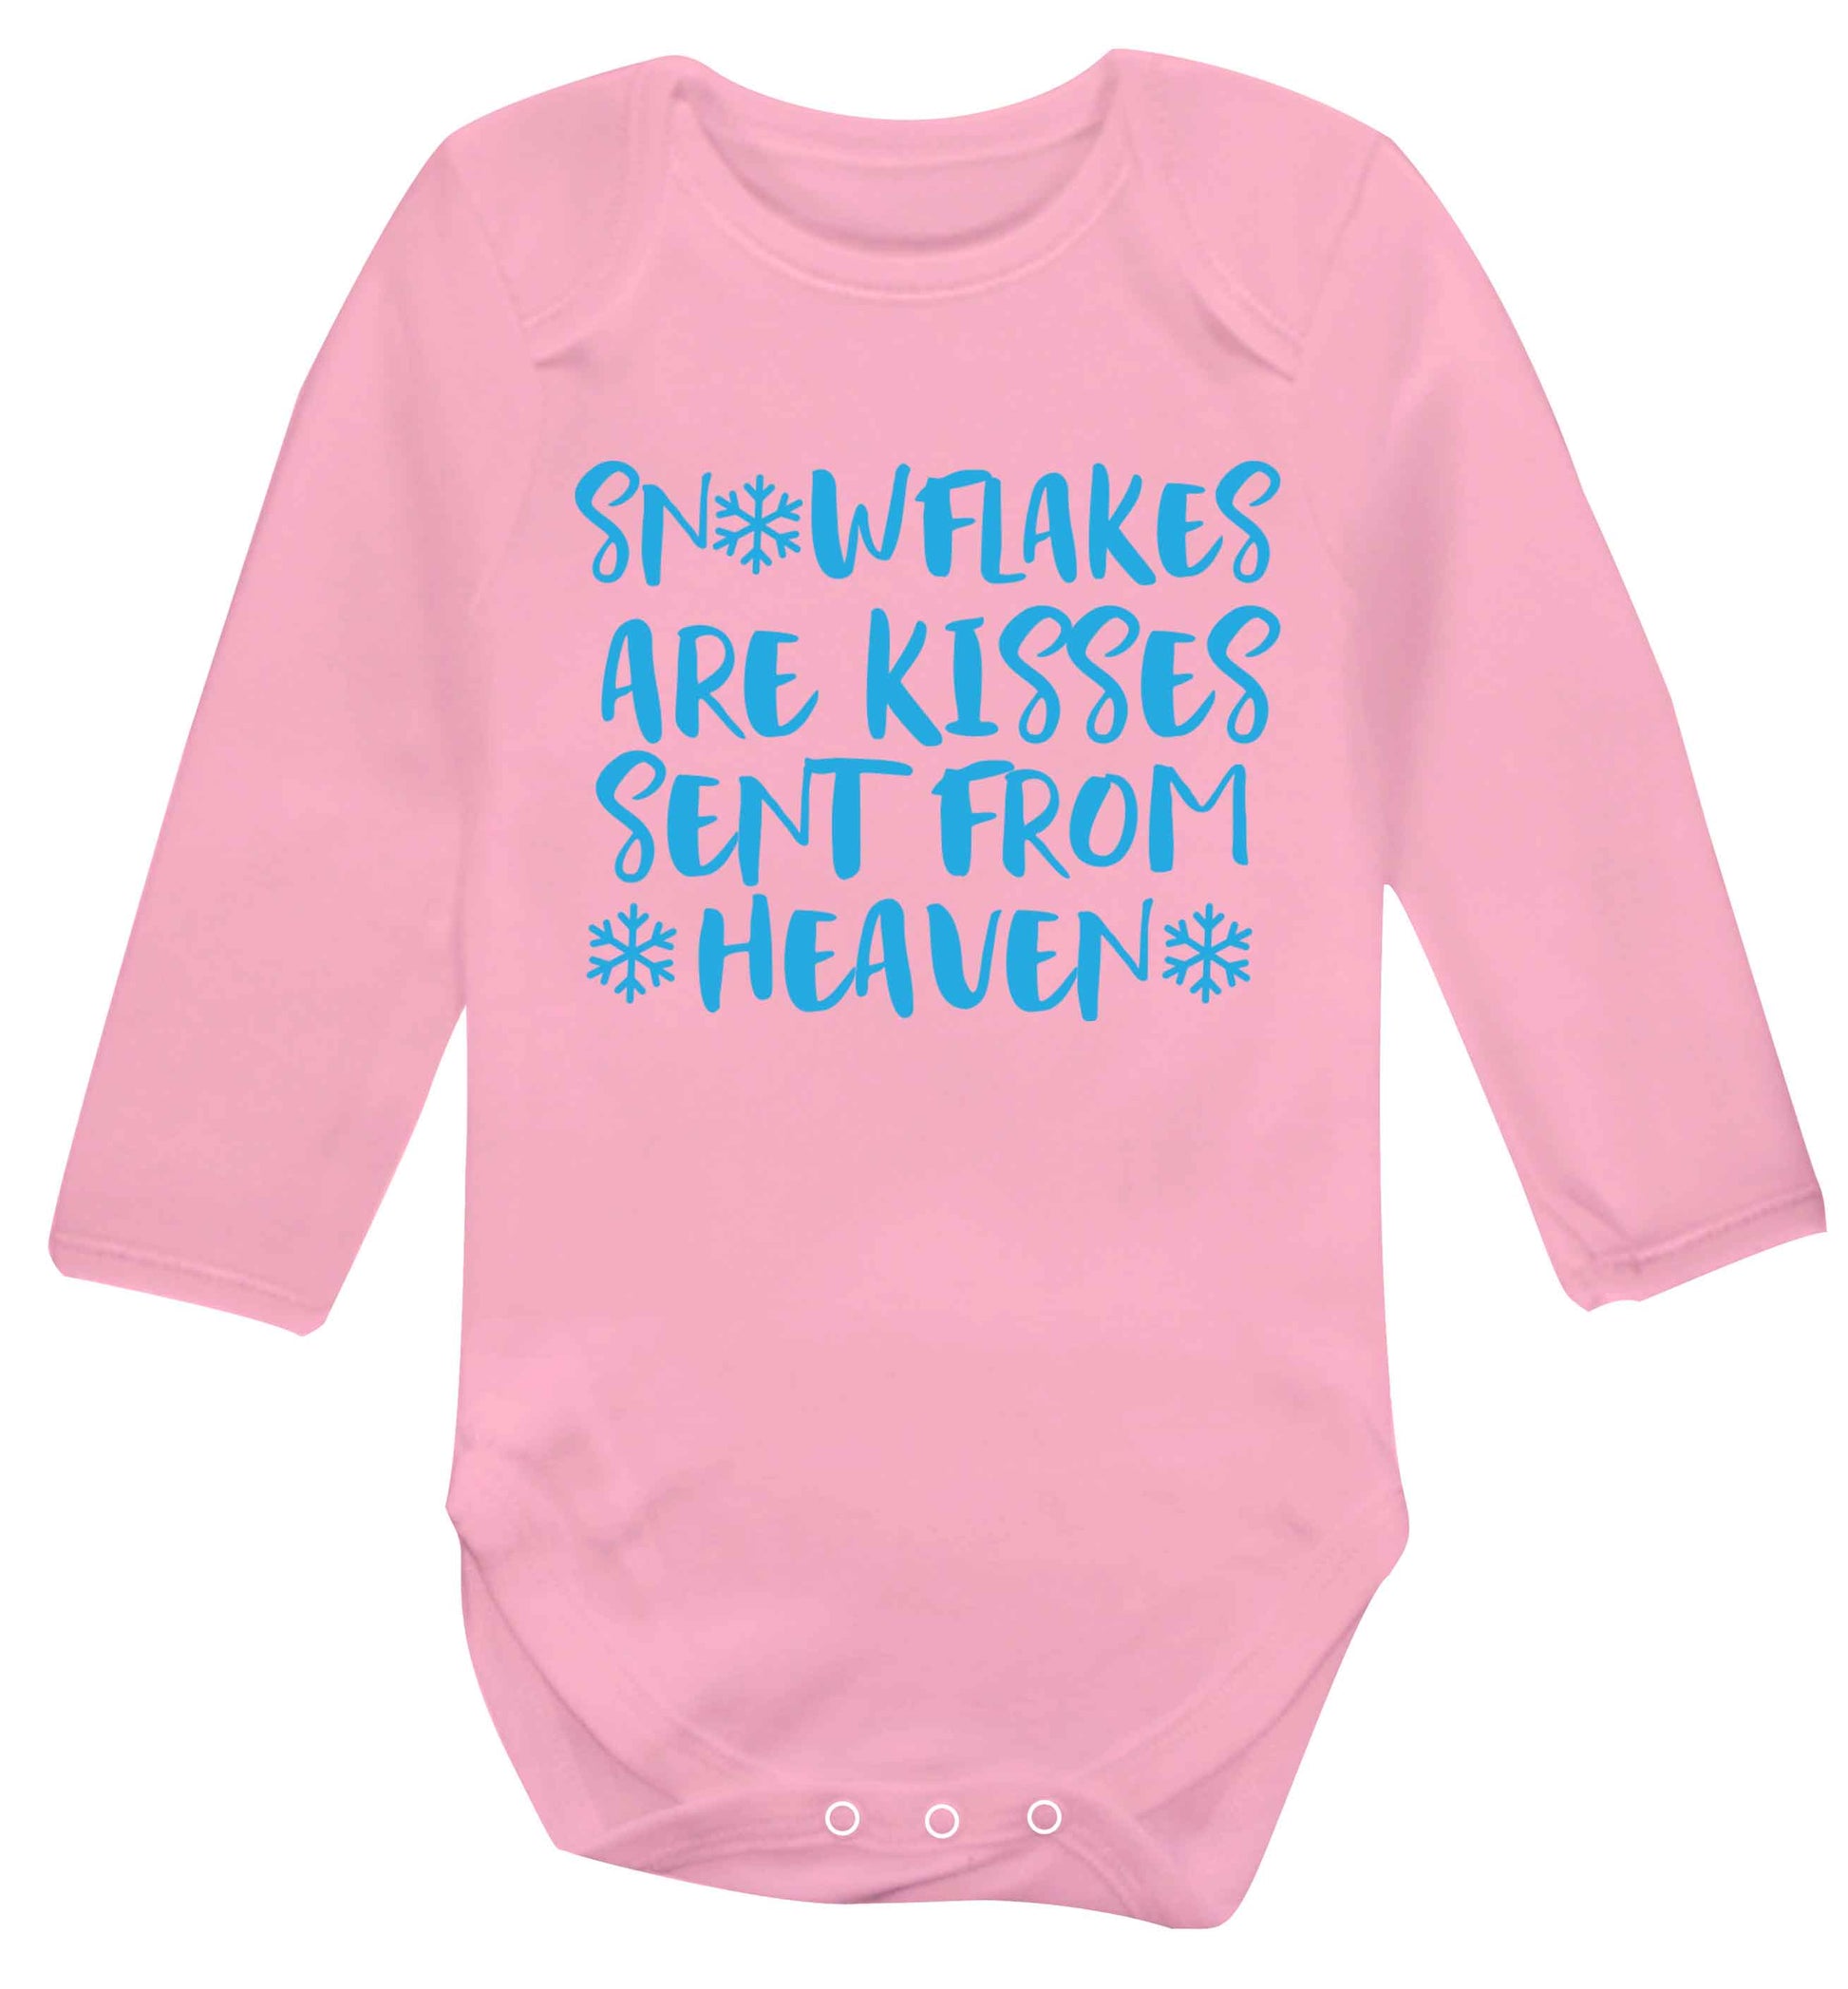 Snowflakes are kisses sent from heaven Baby Vest long sleeved pale pink 6-12 months